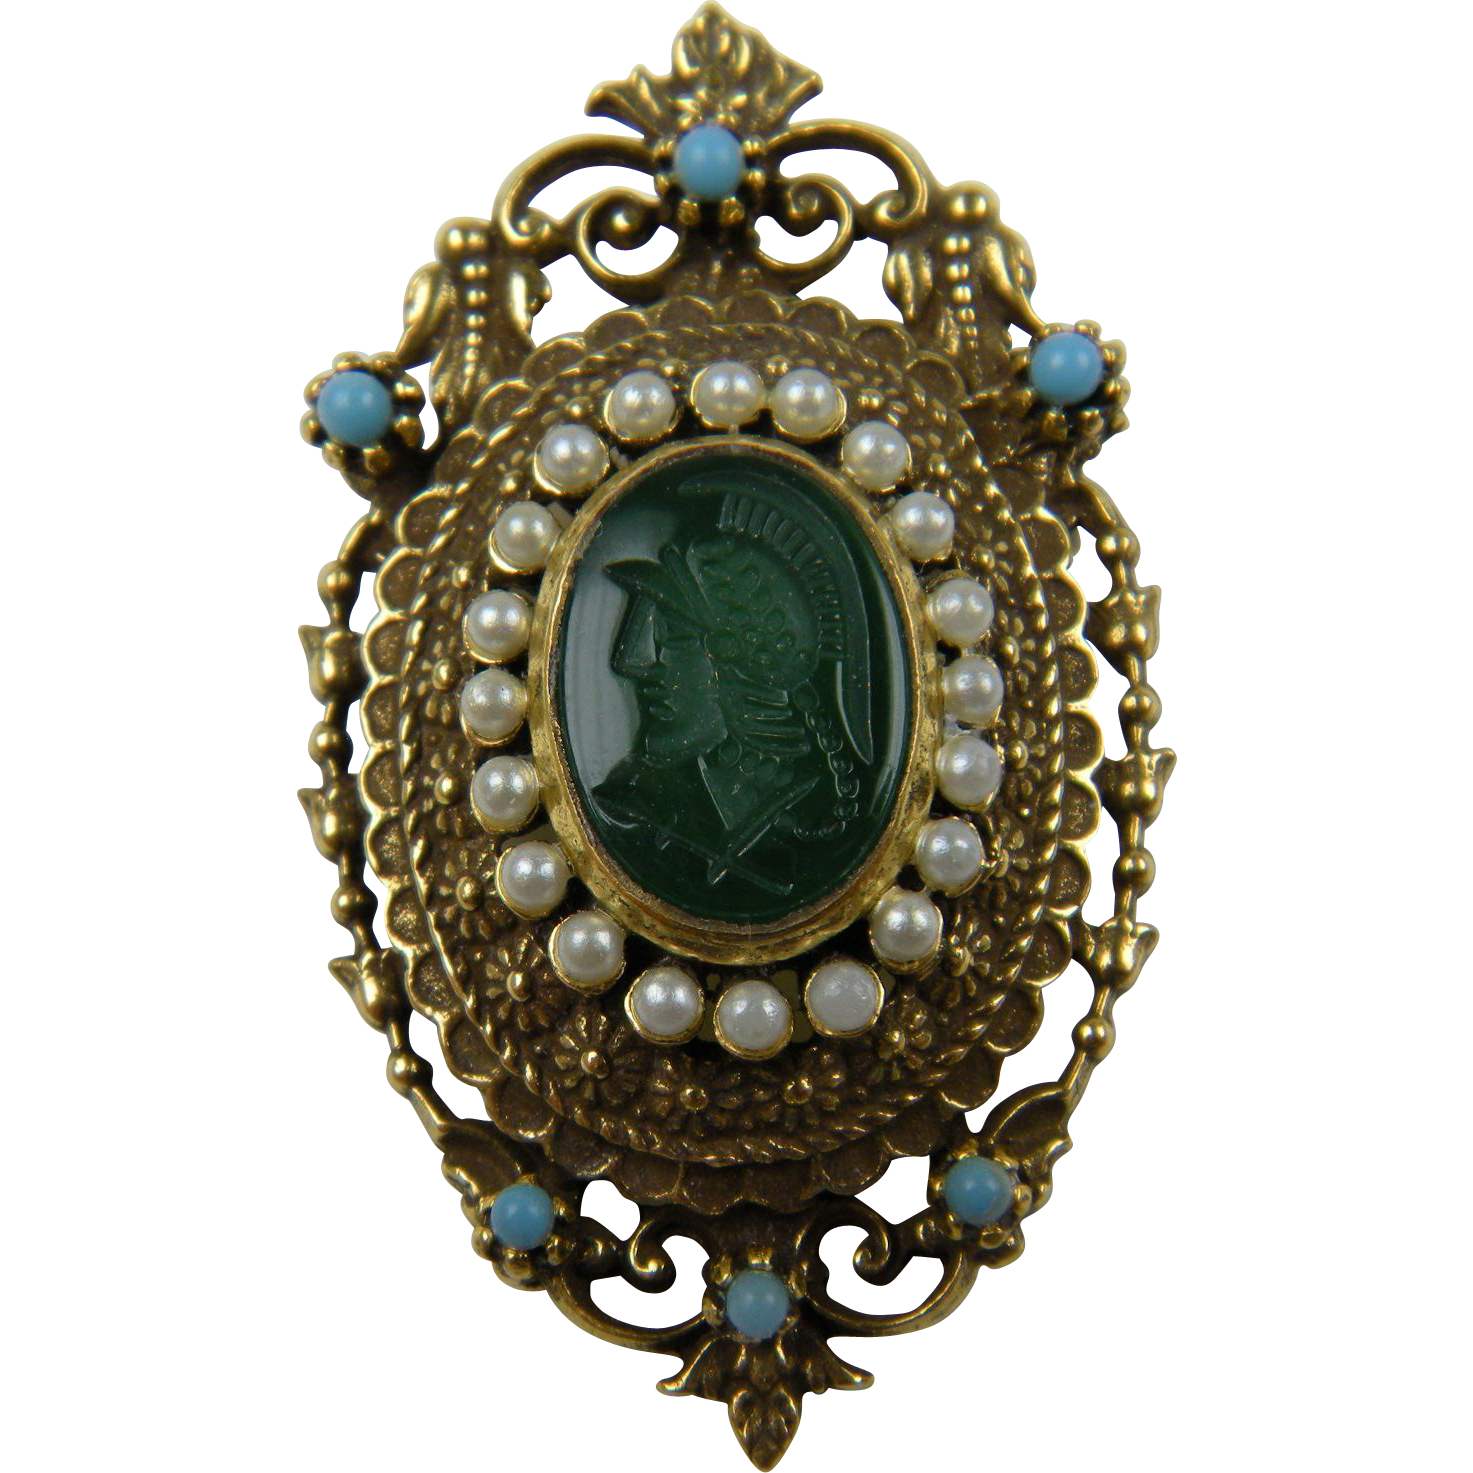 Unsigned FLORENZA Brooch with Imitation Cameo from jackiesgems on Ruby Lane